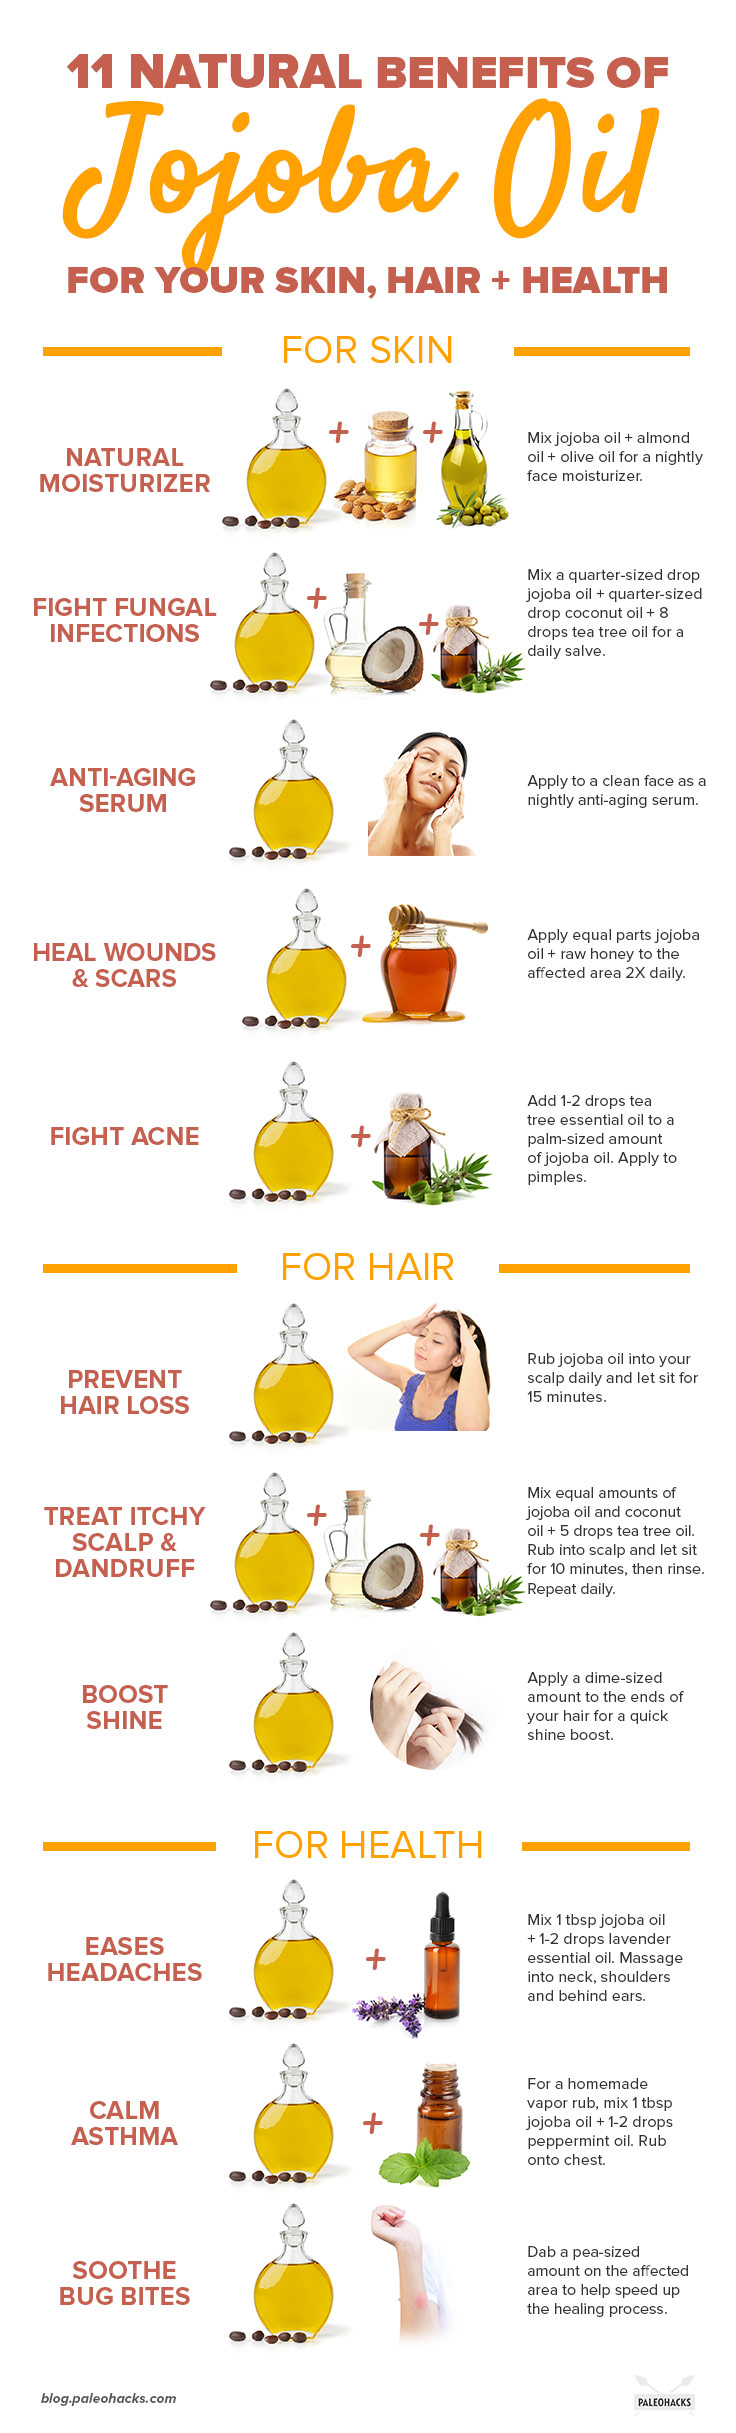 Jojoba oil is the ultimate natural moisturizer for silky hair and soft skin. Here are easy ways to add this essential oil to your beauty routine.